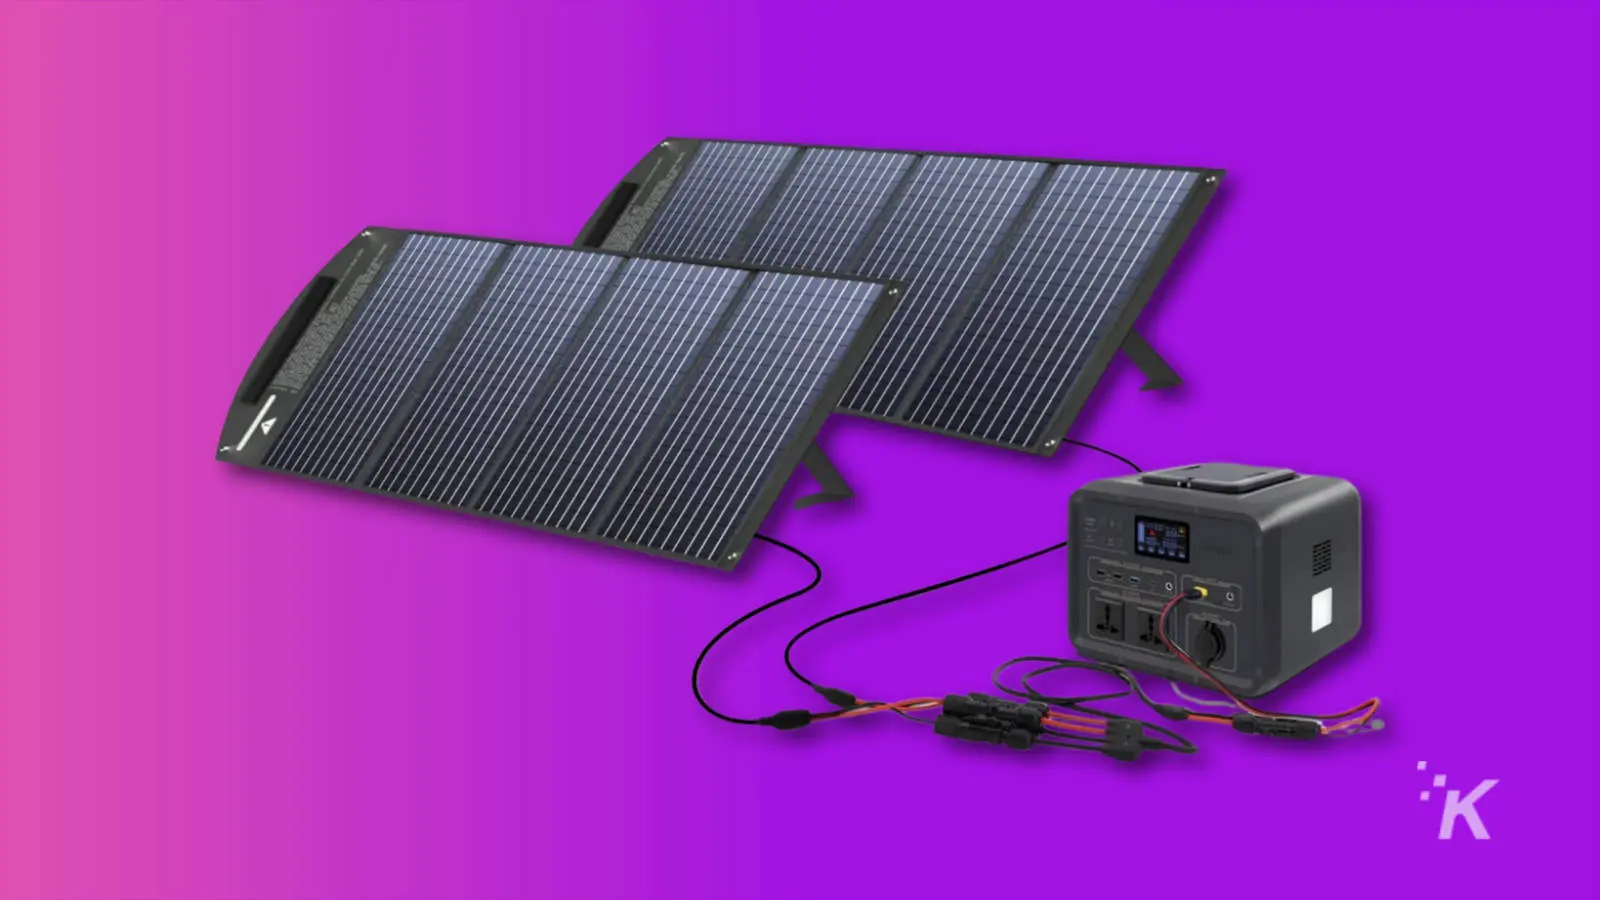 itehil power bank with two solar panels